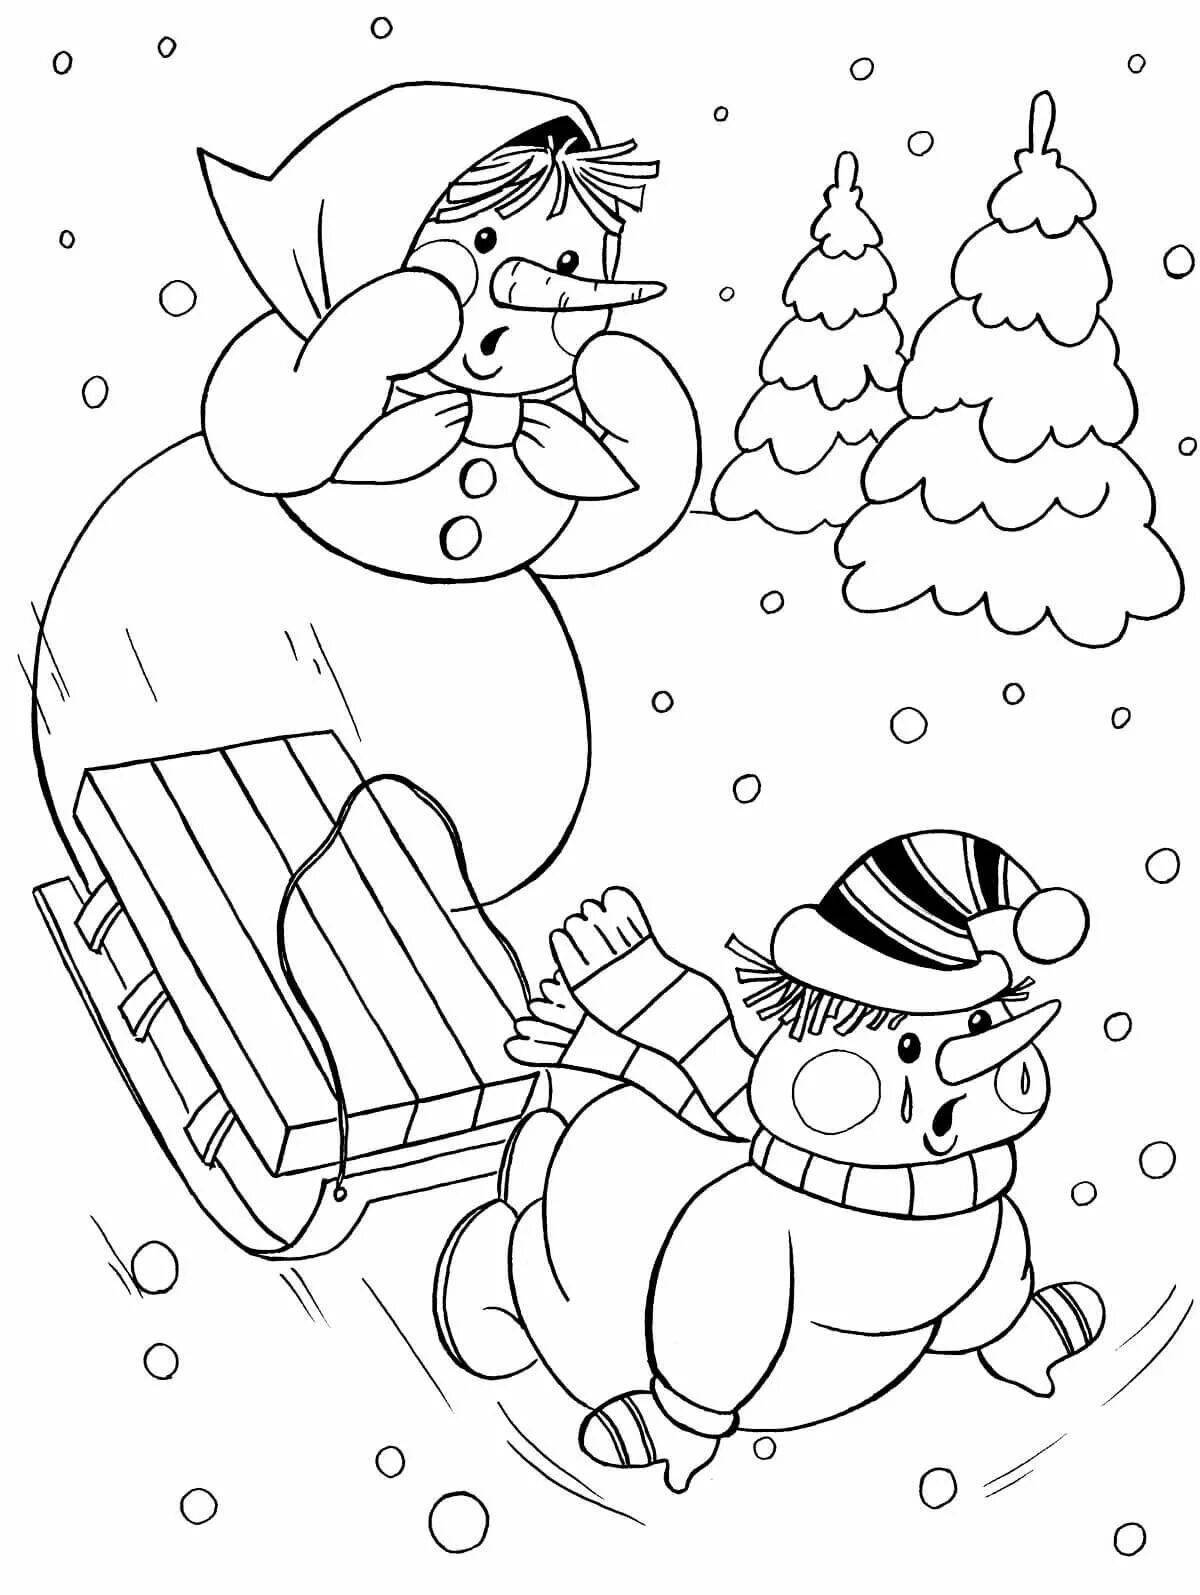 Chipper snowman coloring page on sleigh